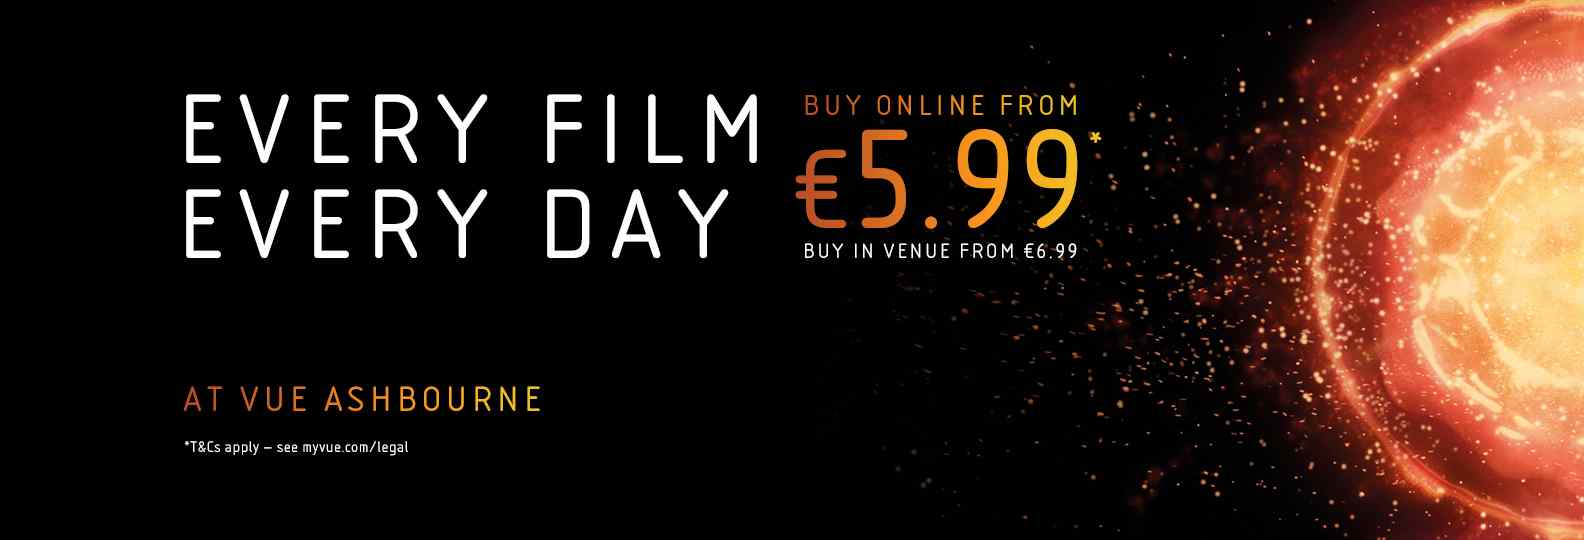 Vue Ashbourne | Every Film, Every Day from €5.99